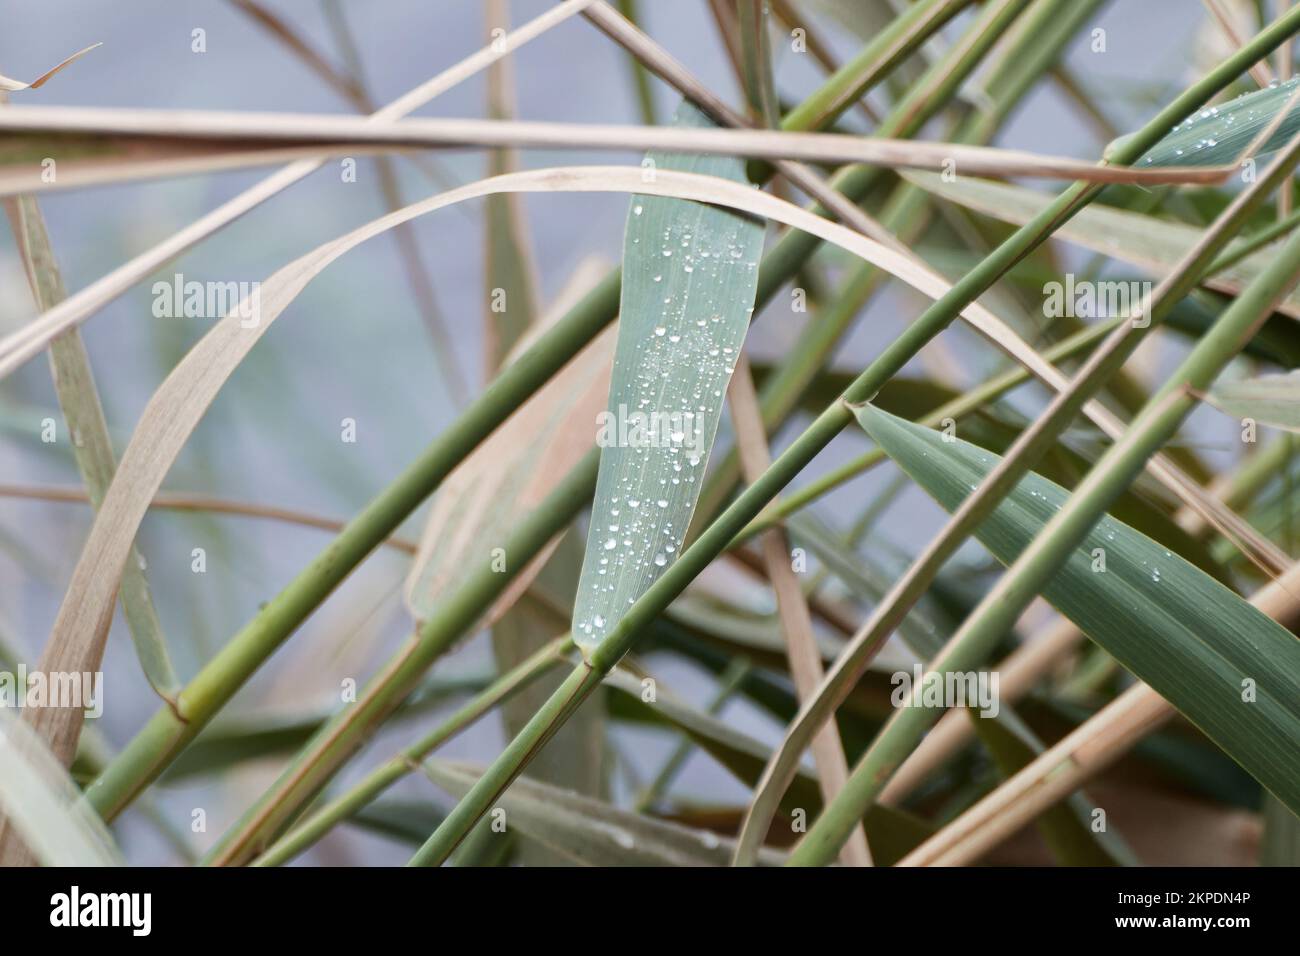 Lattice of riverside reeds with a leaf in the foreground with sparkling water droplets on its beam. Selective focus. Stock Photo